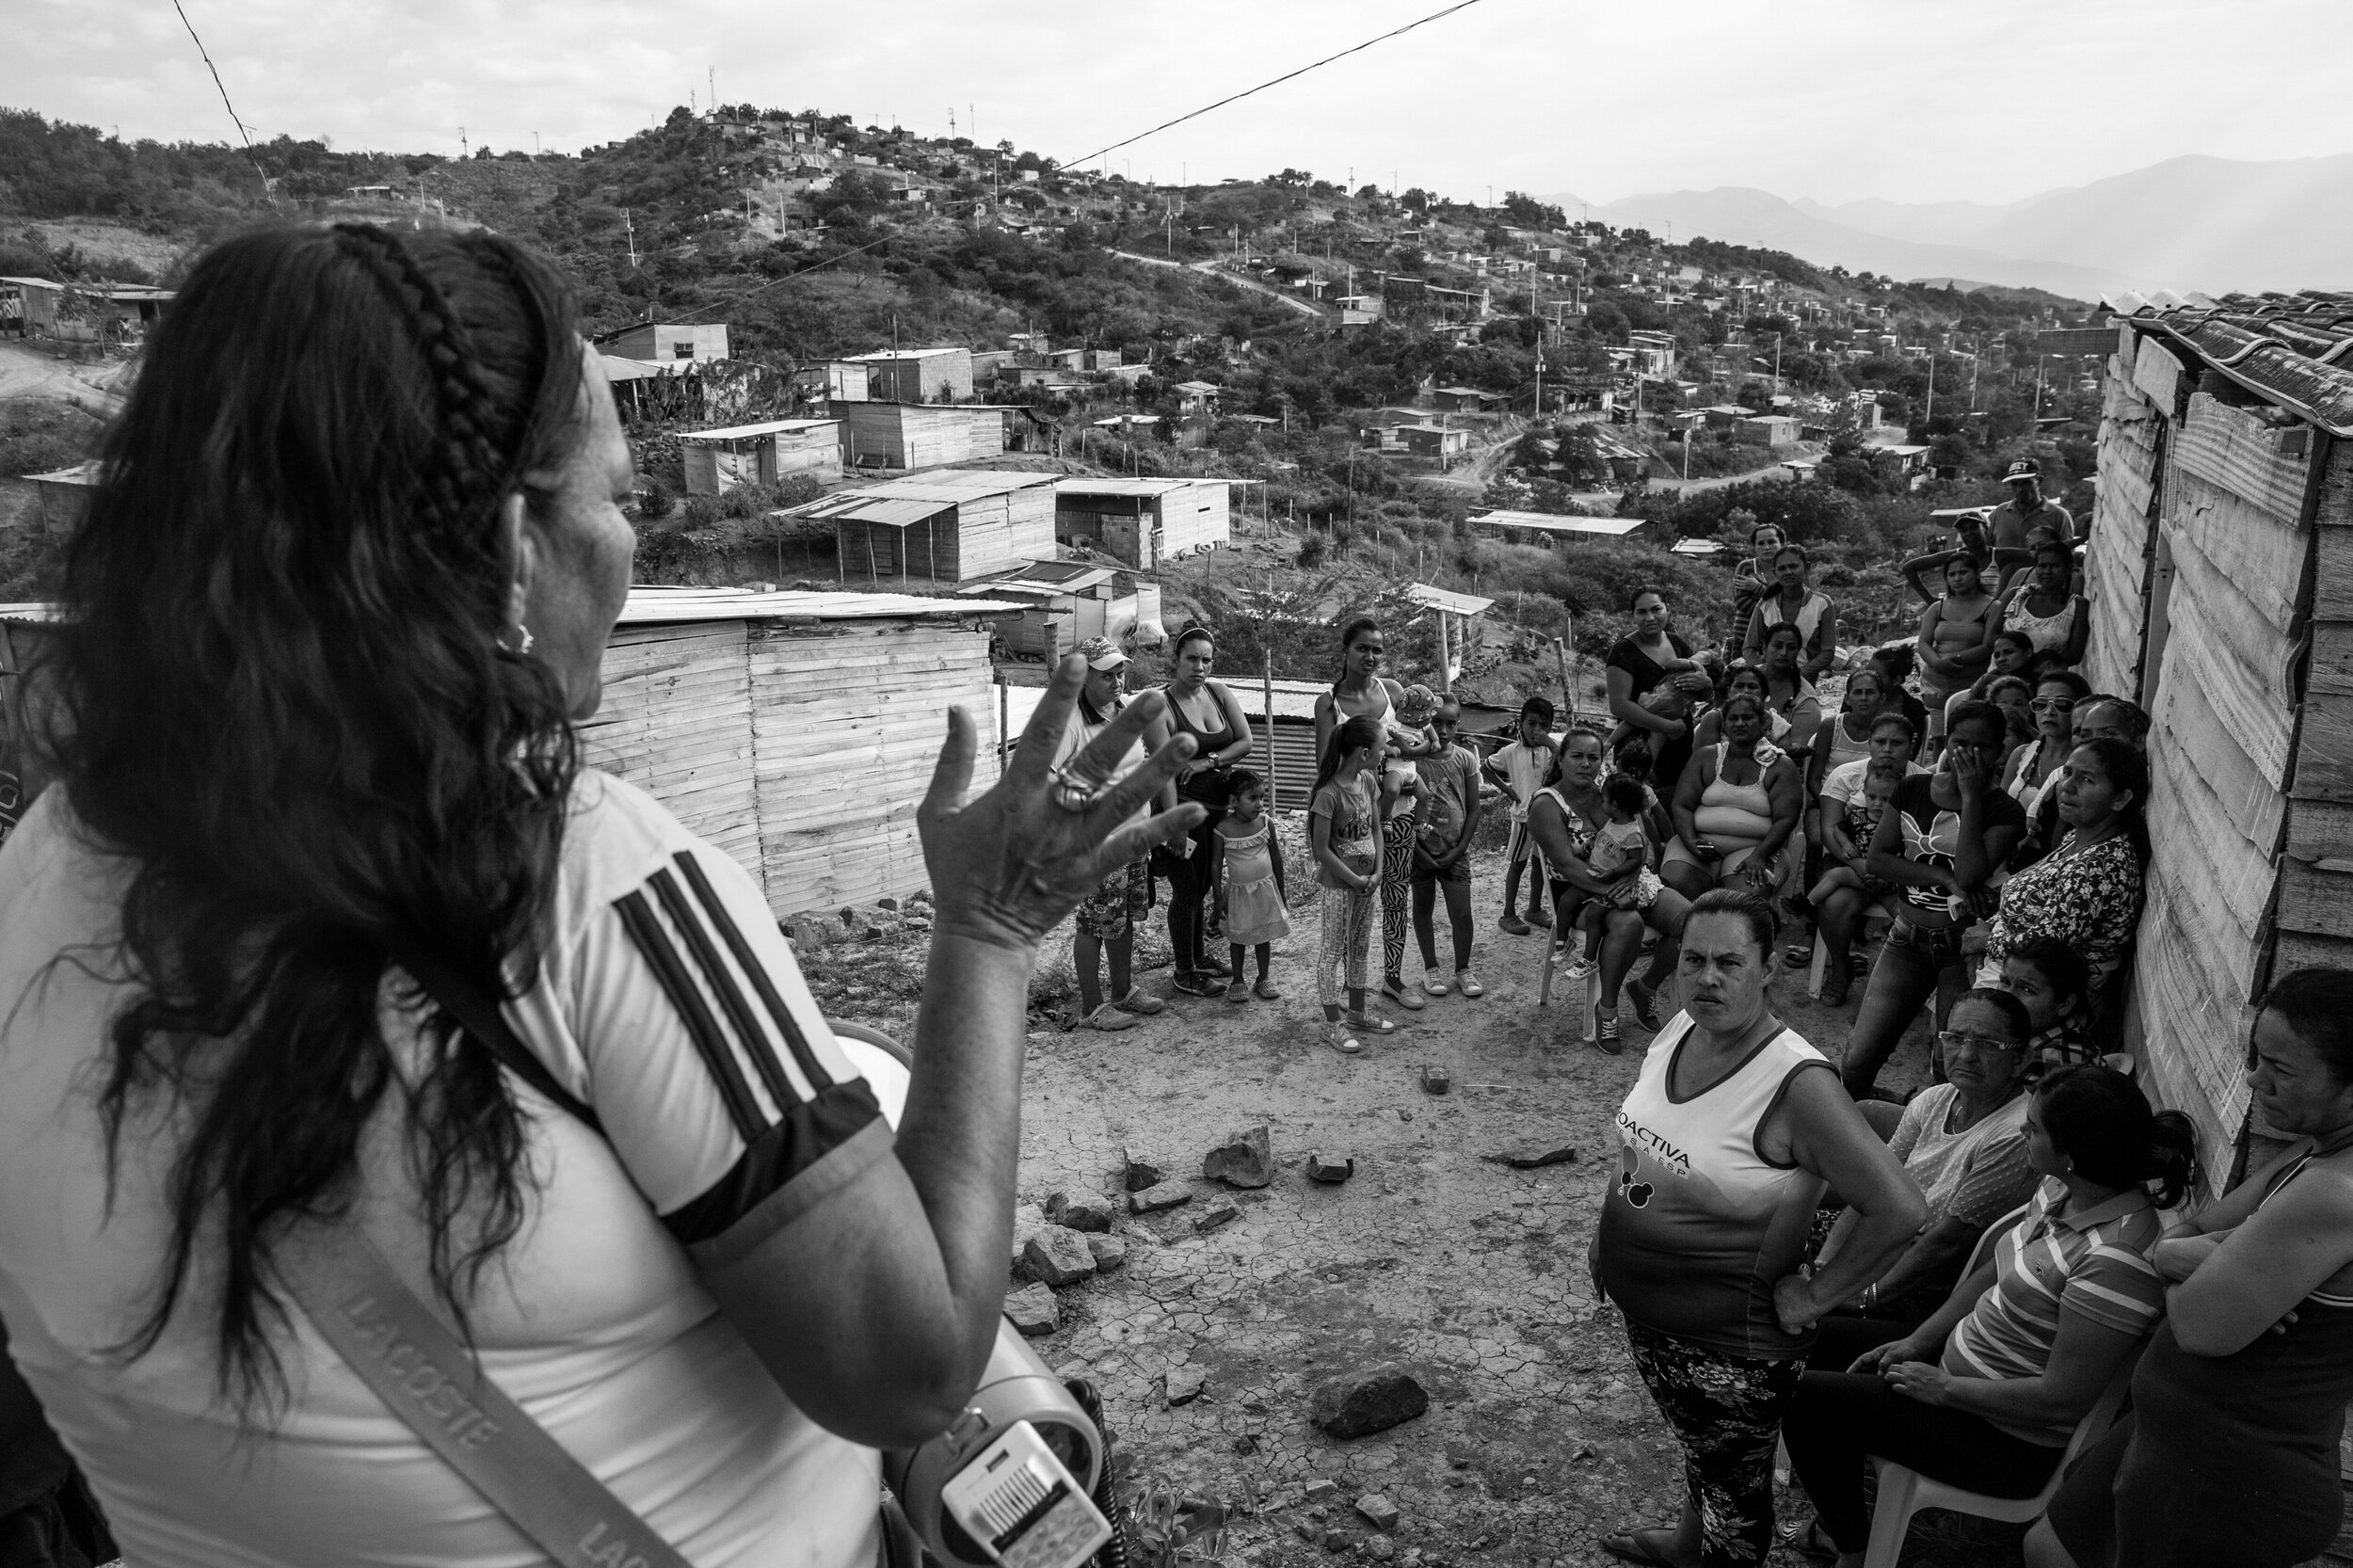  Sonia Pimento, leader of the Alfonso Gómez community, holds a meeting to share news of NGOs coming to offer training in domestic violence and leadership.  Pimento assumed leadership after seeing a need to organise the newly arrived families looking 